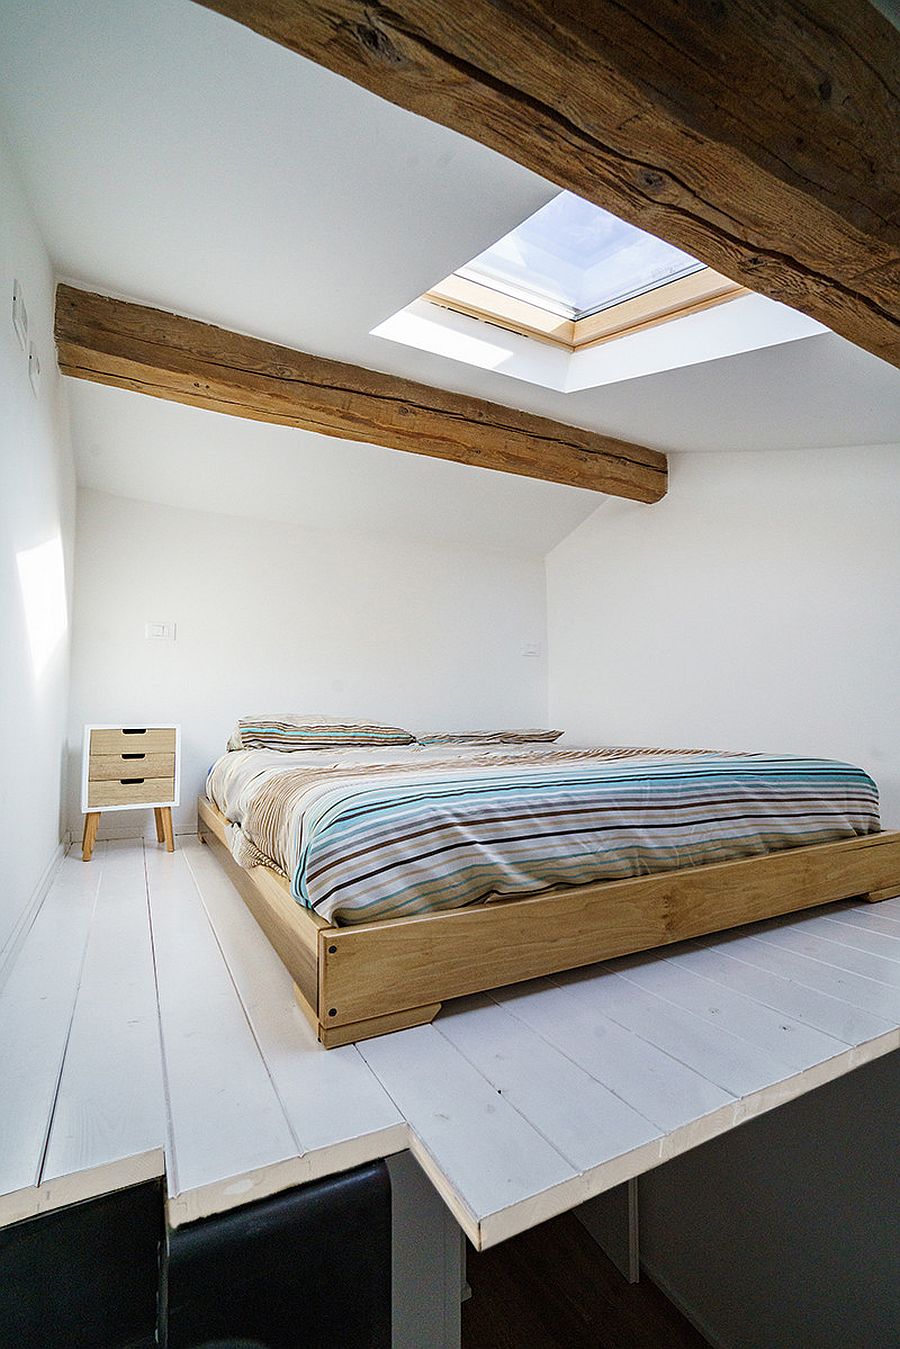 Skylight-brings-natural-light-into-the-tiny-attic-level-industrial-bedroom-in-white-48249